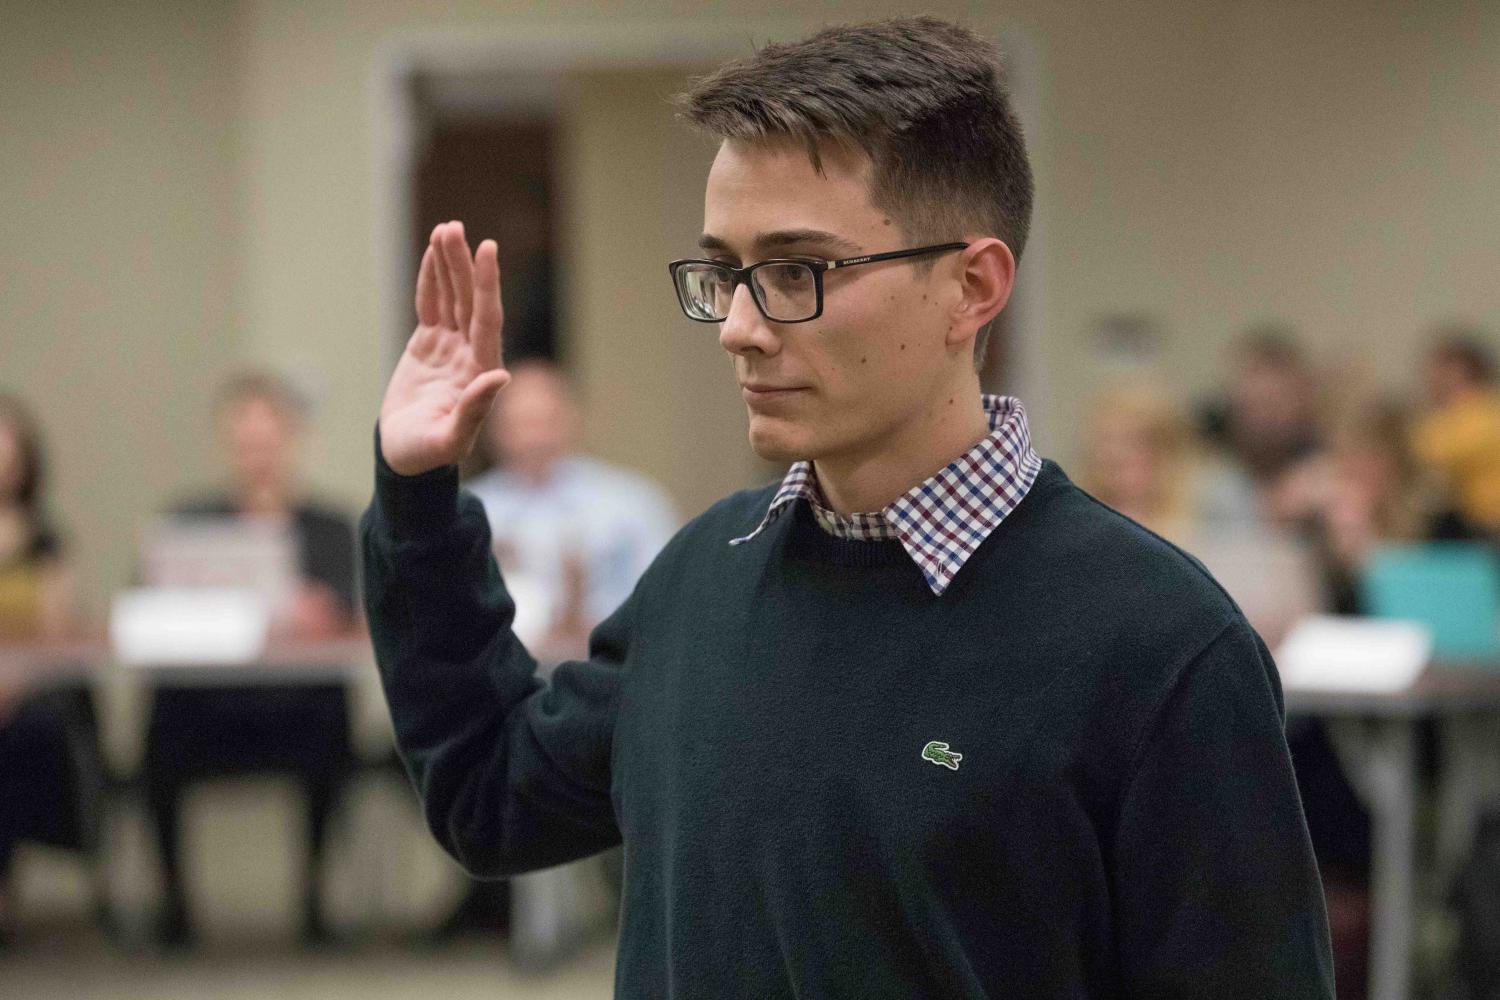 Andrew+Linnabary%2C+former+managing+editor+for+The+Sunflower%2C+is+sworn+in+as+SGAs+Director+of+Public+Relations.+Linnabary+will+serve+as+DPR+for+the+60th+Session+of+Wichita+States+Student+Government+Association.+